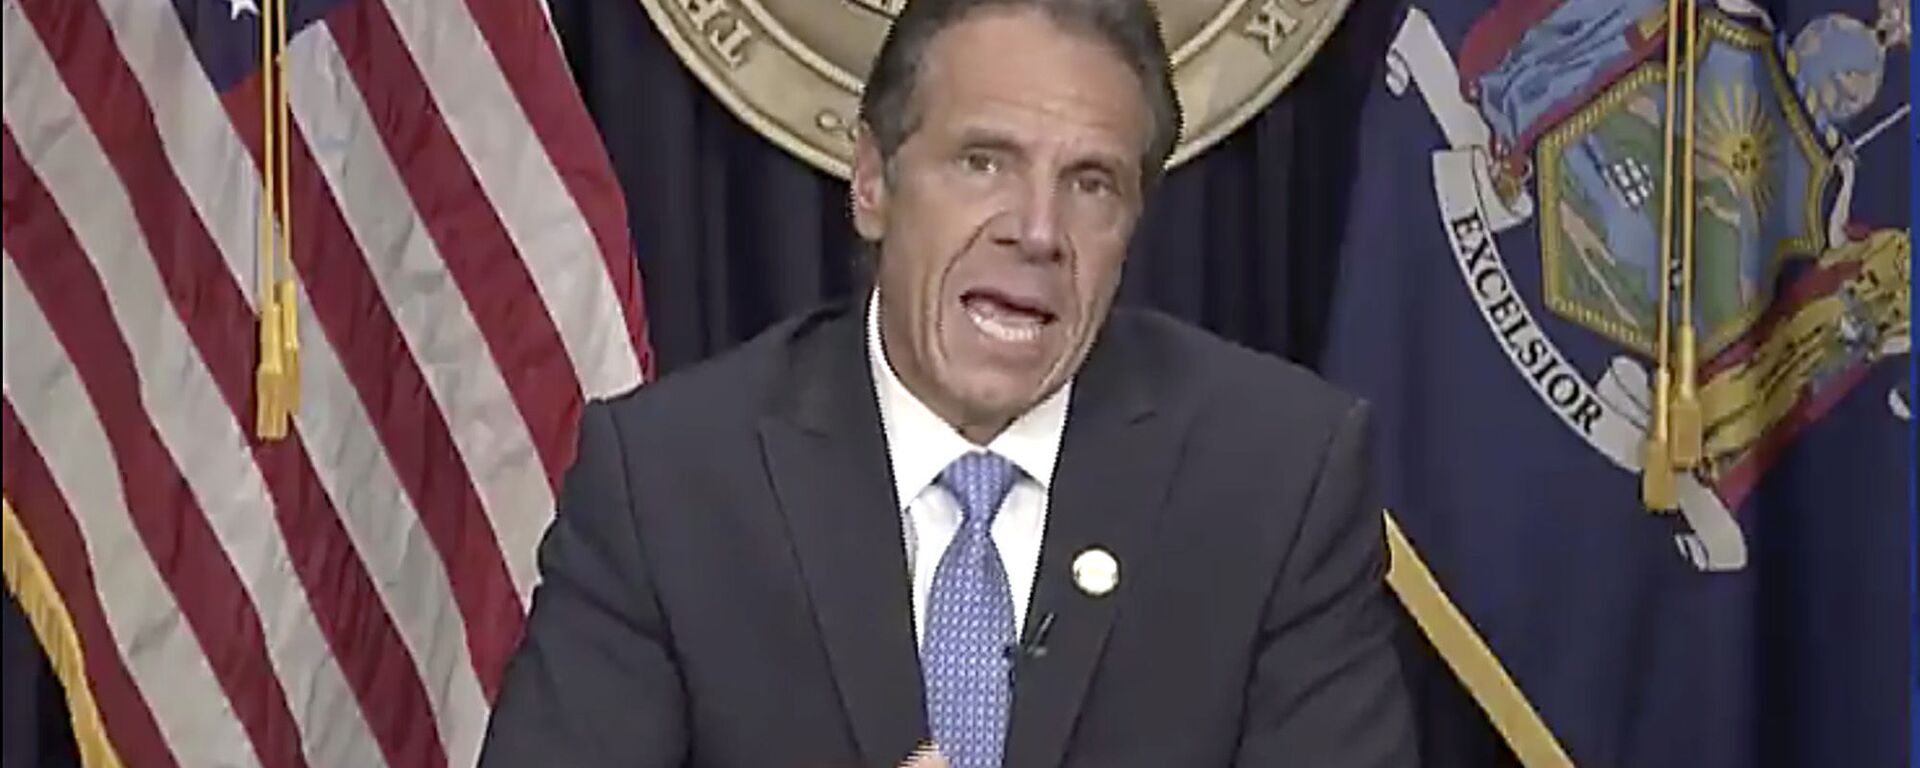 In this still image from video,  Gov. Andrew Cuomo speaks during a news conference in Albany, N.Y. on Tuesday, Aug. 10, 2021.  Cuomo has resigned over a barrage of sexual harassment allegations in a fall from grace a year after he was widely hailed nationally for his detailed daily briefings and leadership during the darkest days of COVID-19. (Office of the Governor of New York via AP) - Sputnik International, 1920, 10.08.2021